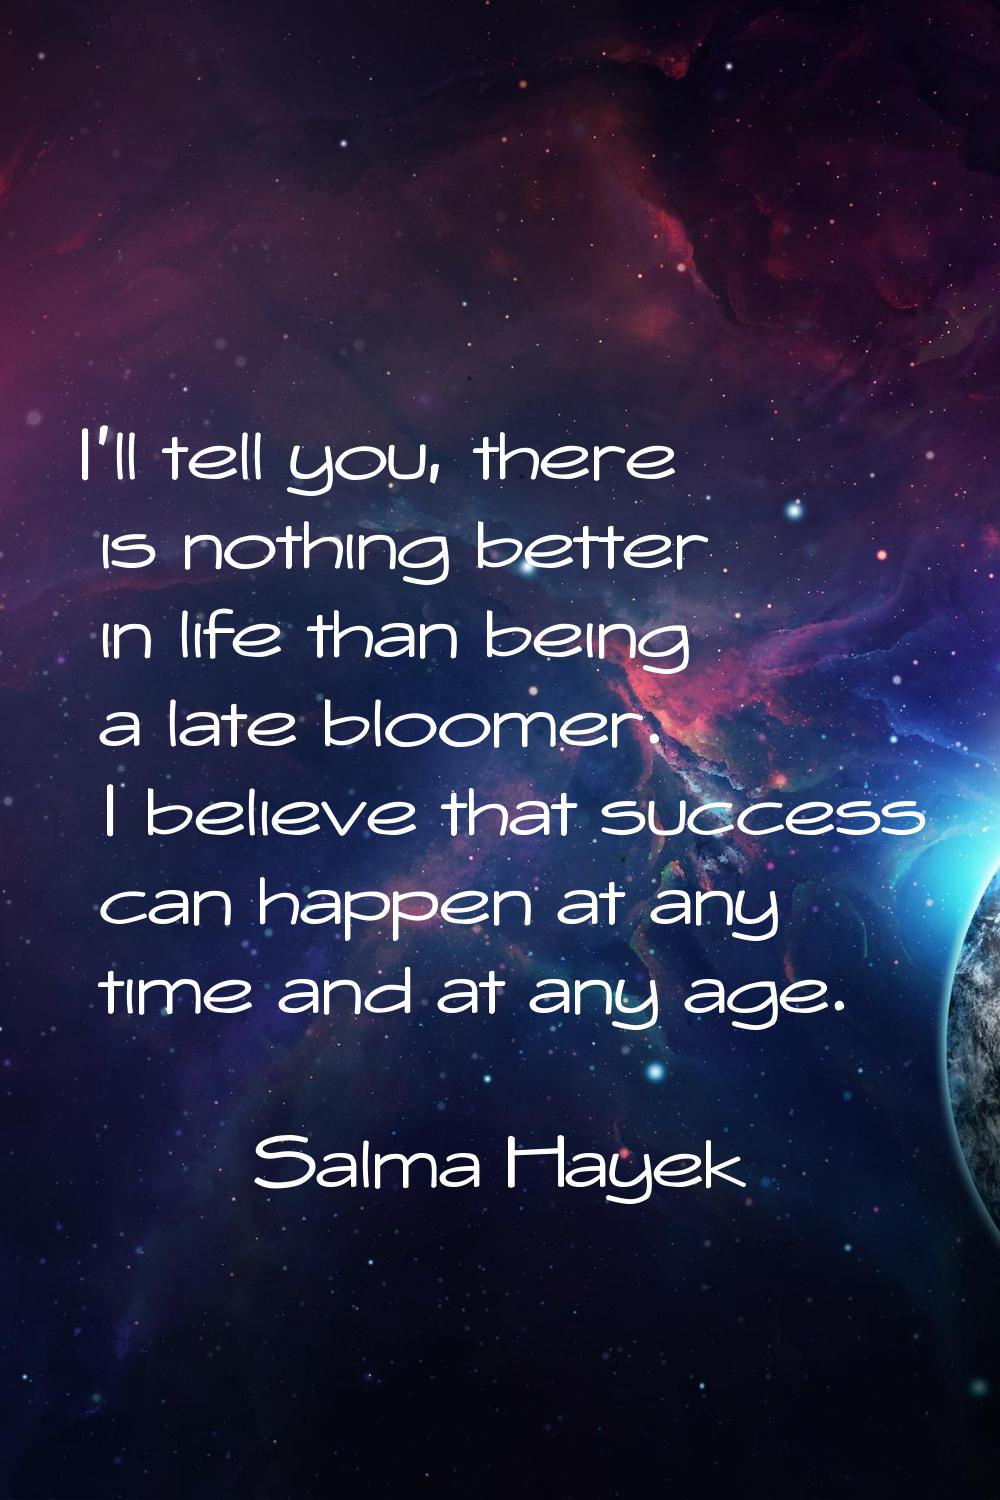 I'll tell you, there is nothing better in life than being a late bloomer. I believe that success ca